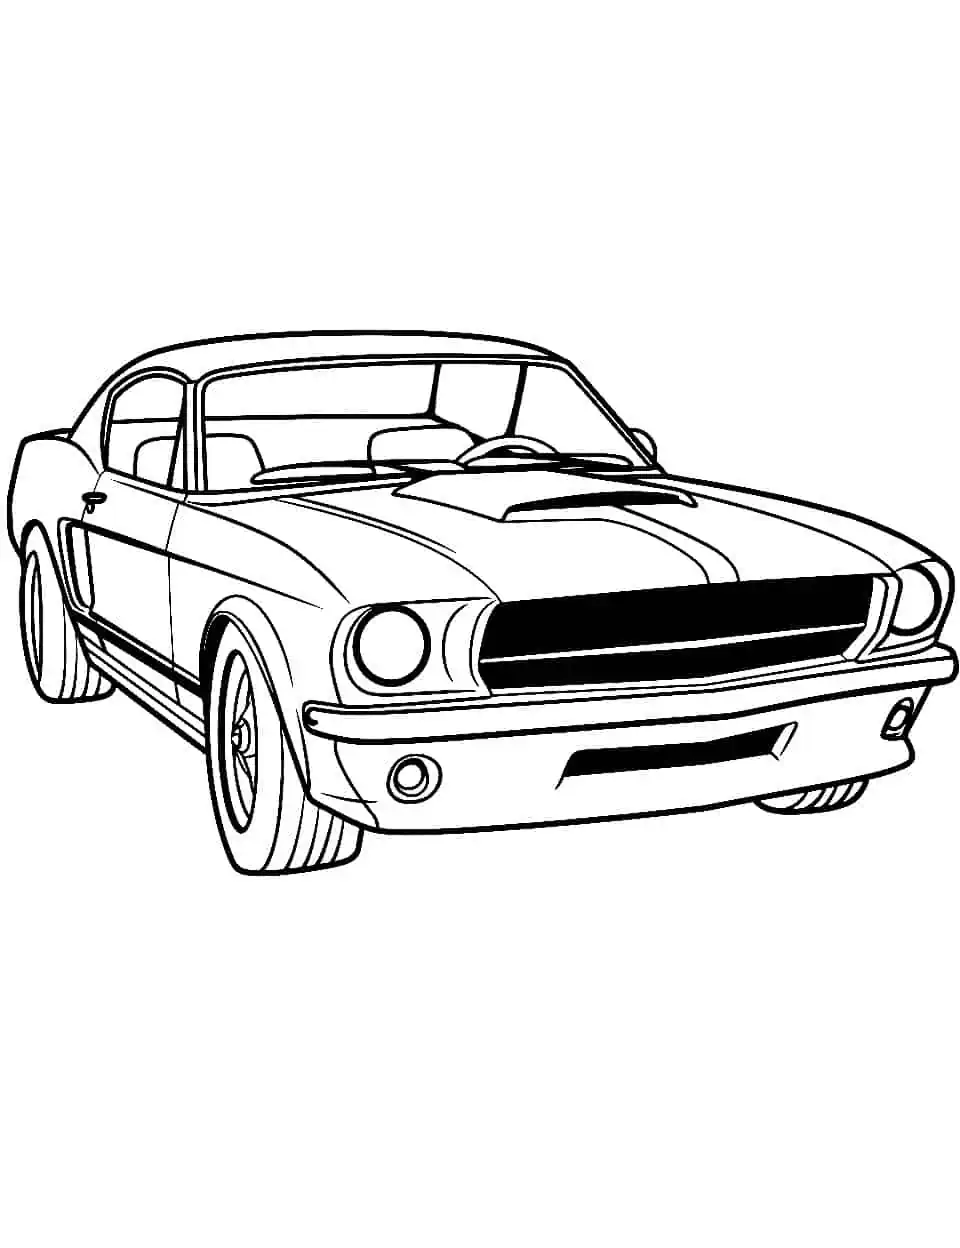 Classic Mustang Muscles Car Coloring Page - A detailed image of a classic Ford Mustang muscle car, ready to be colored by older kids.